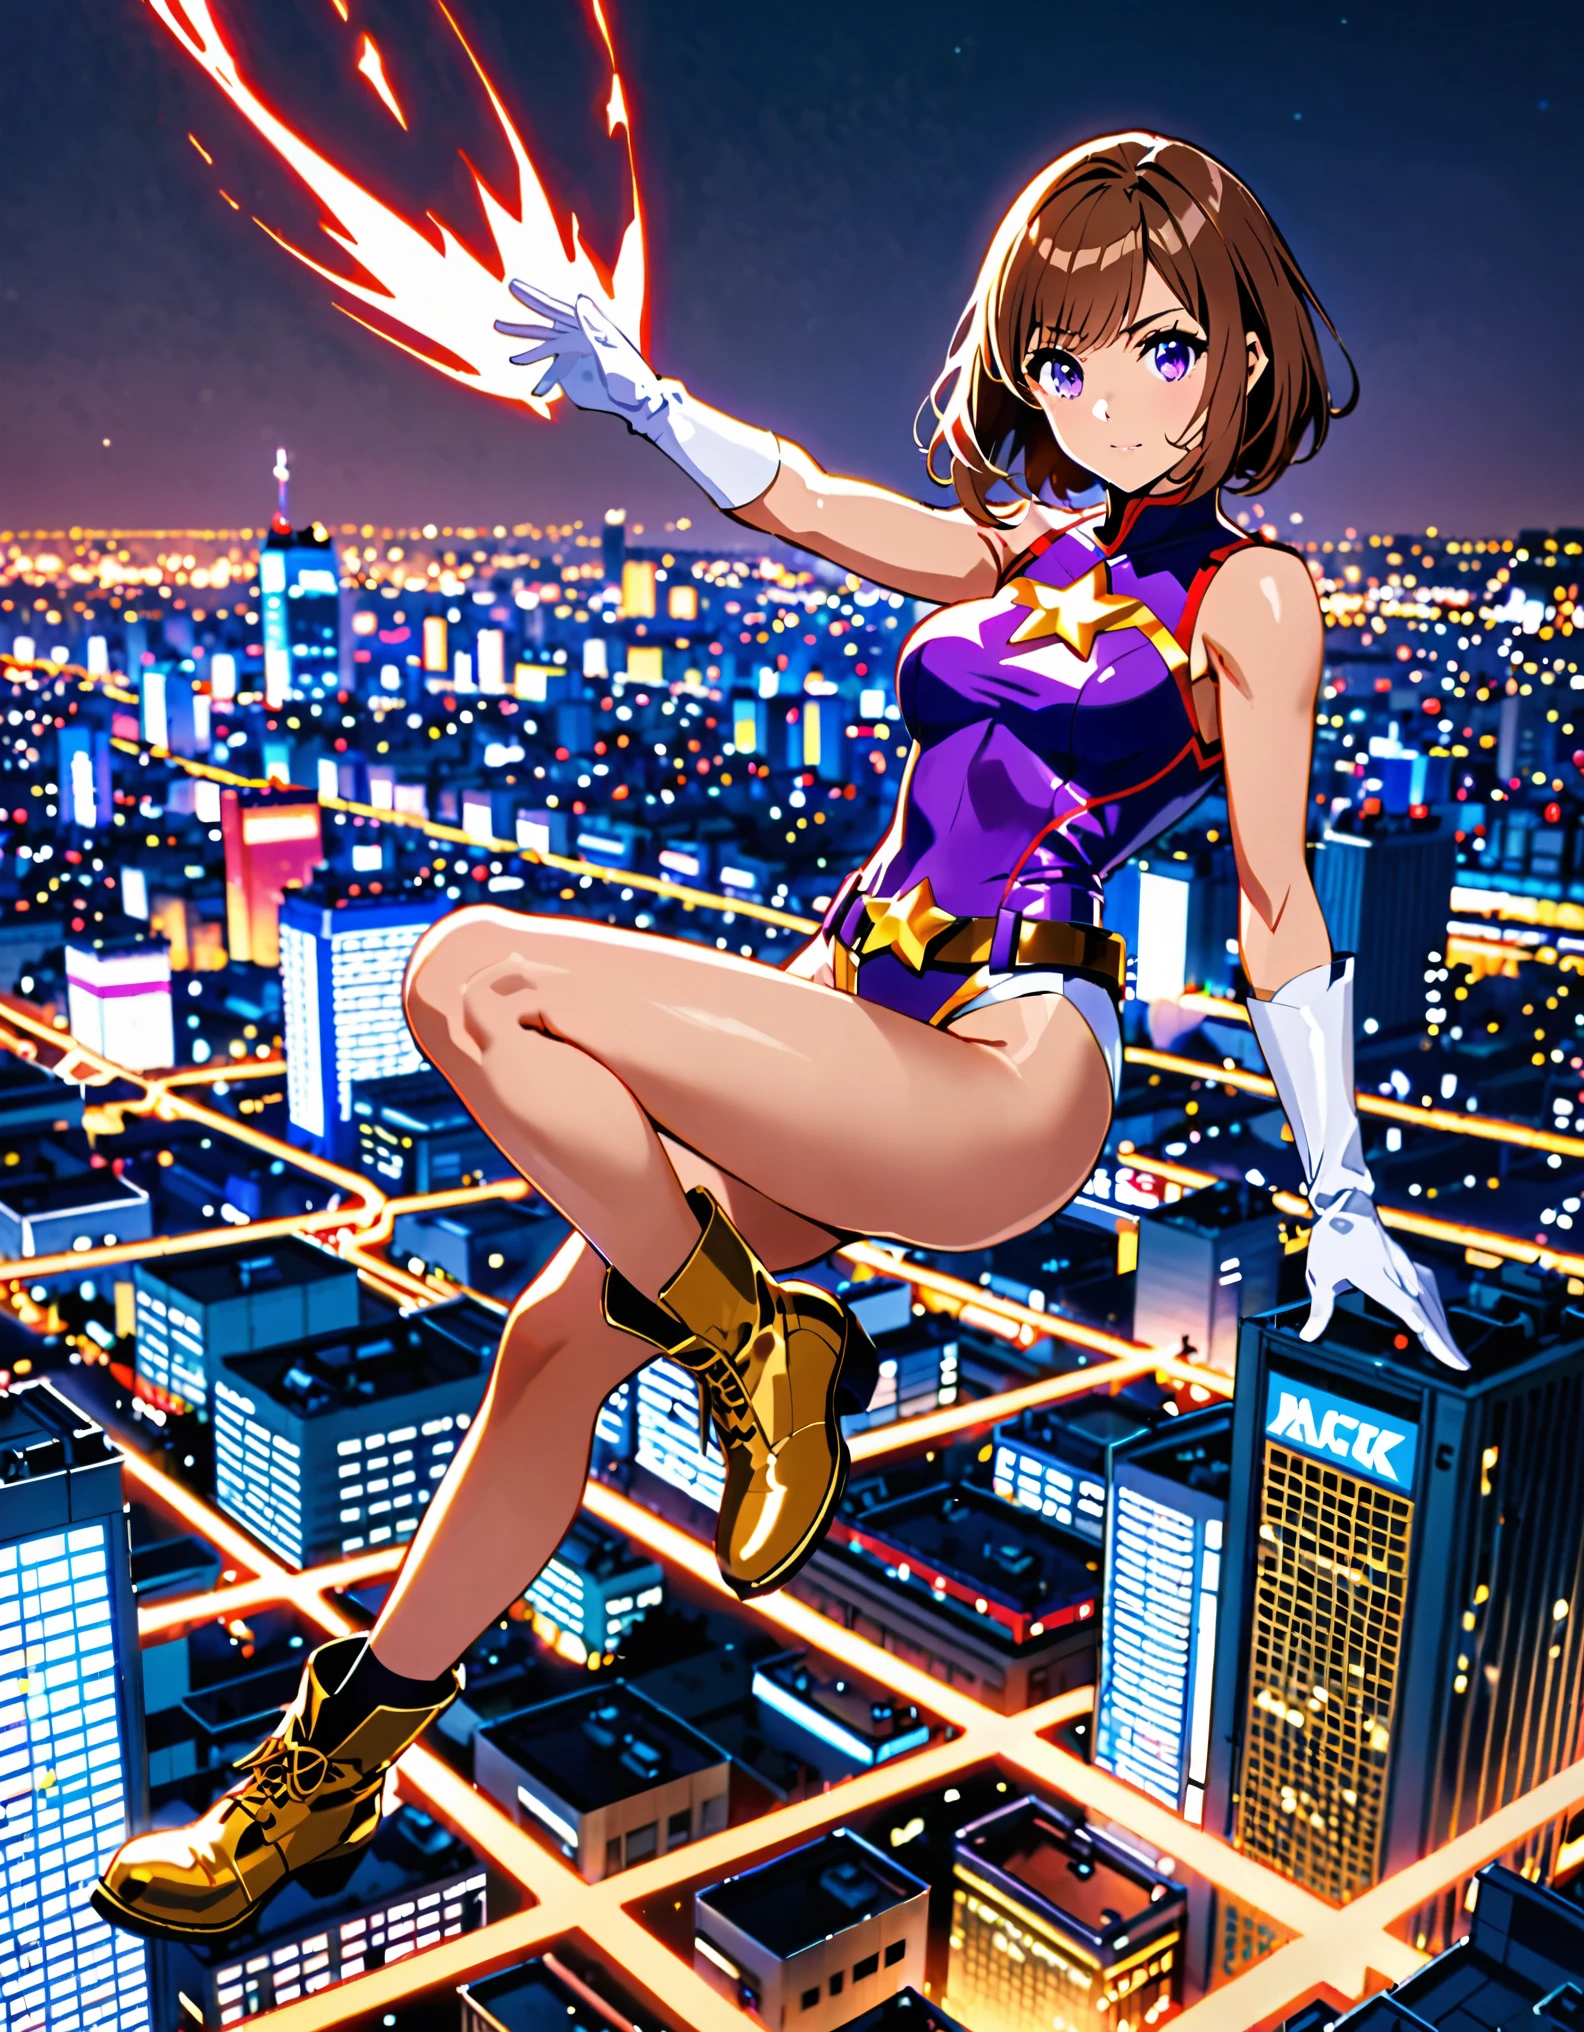 (masterpiece), (best quality), (high res), medium breasts, ((leotard, white and red leotard, matching leotard, sleeveless, bare legs)), ((tight belt, gold belt)), ((boots, matching boots, ankle-high boots, white boots)), ((gloves, white gloves)), city backdrop, tokyo city backdrop, solo, single, floating, hovering, legs straight, (full body), cowboy shot, superhero, ((beautiful detailed eyes)), ((gold star symbol on chest)), (brown hair, medium hair, bob hair, purple eyes), (perfect hands, perfect anatomy), cowboy shot, superhero, ((beautiful detailed eyes)), using her powers, full body costume design.